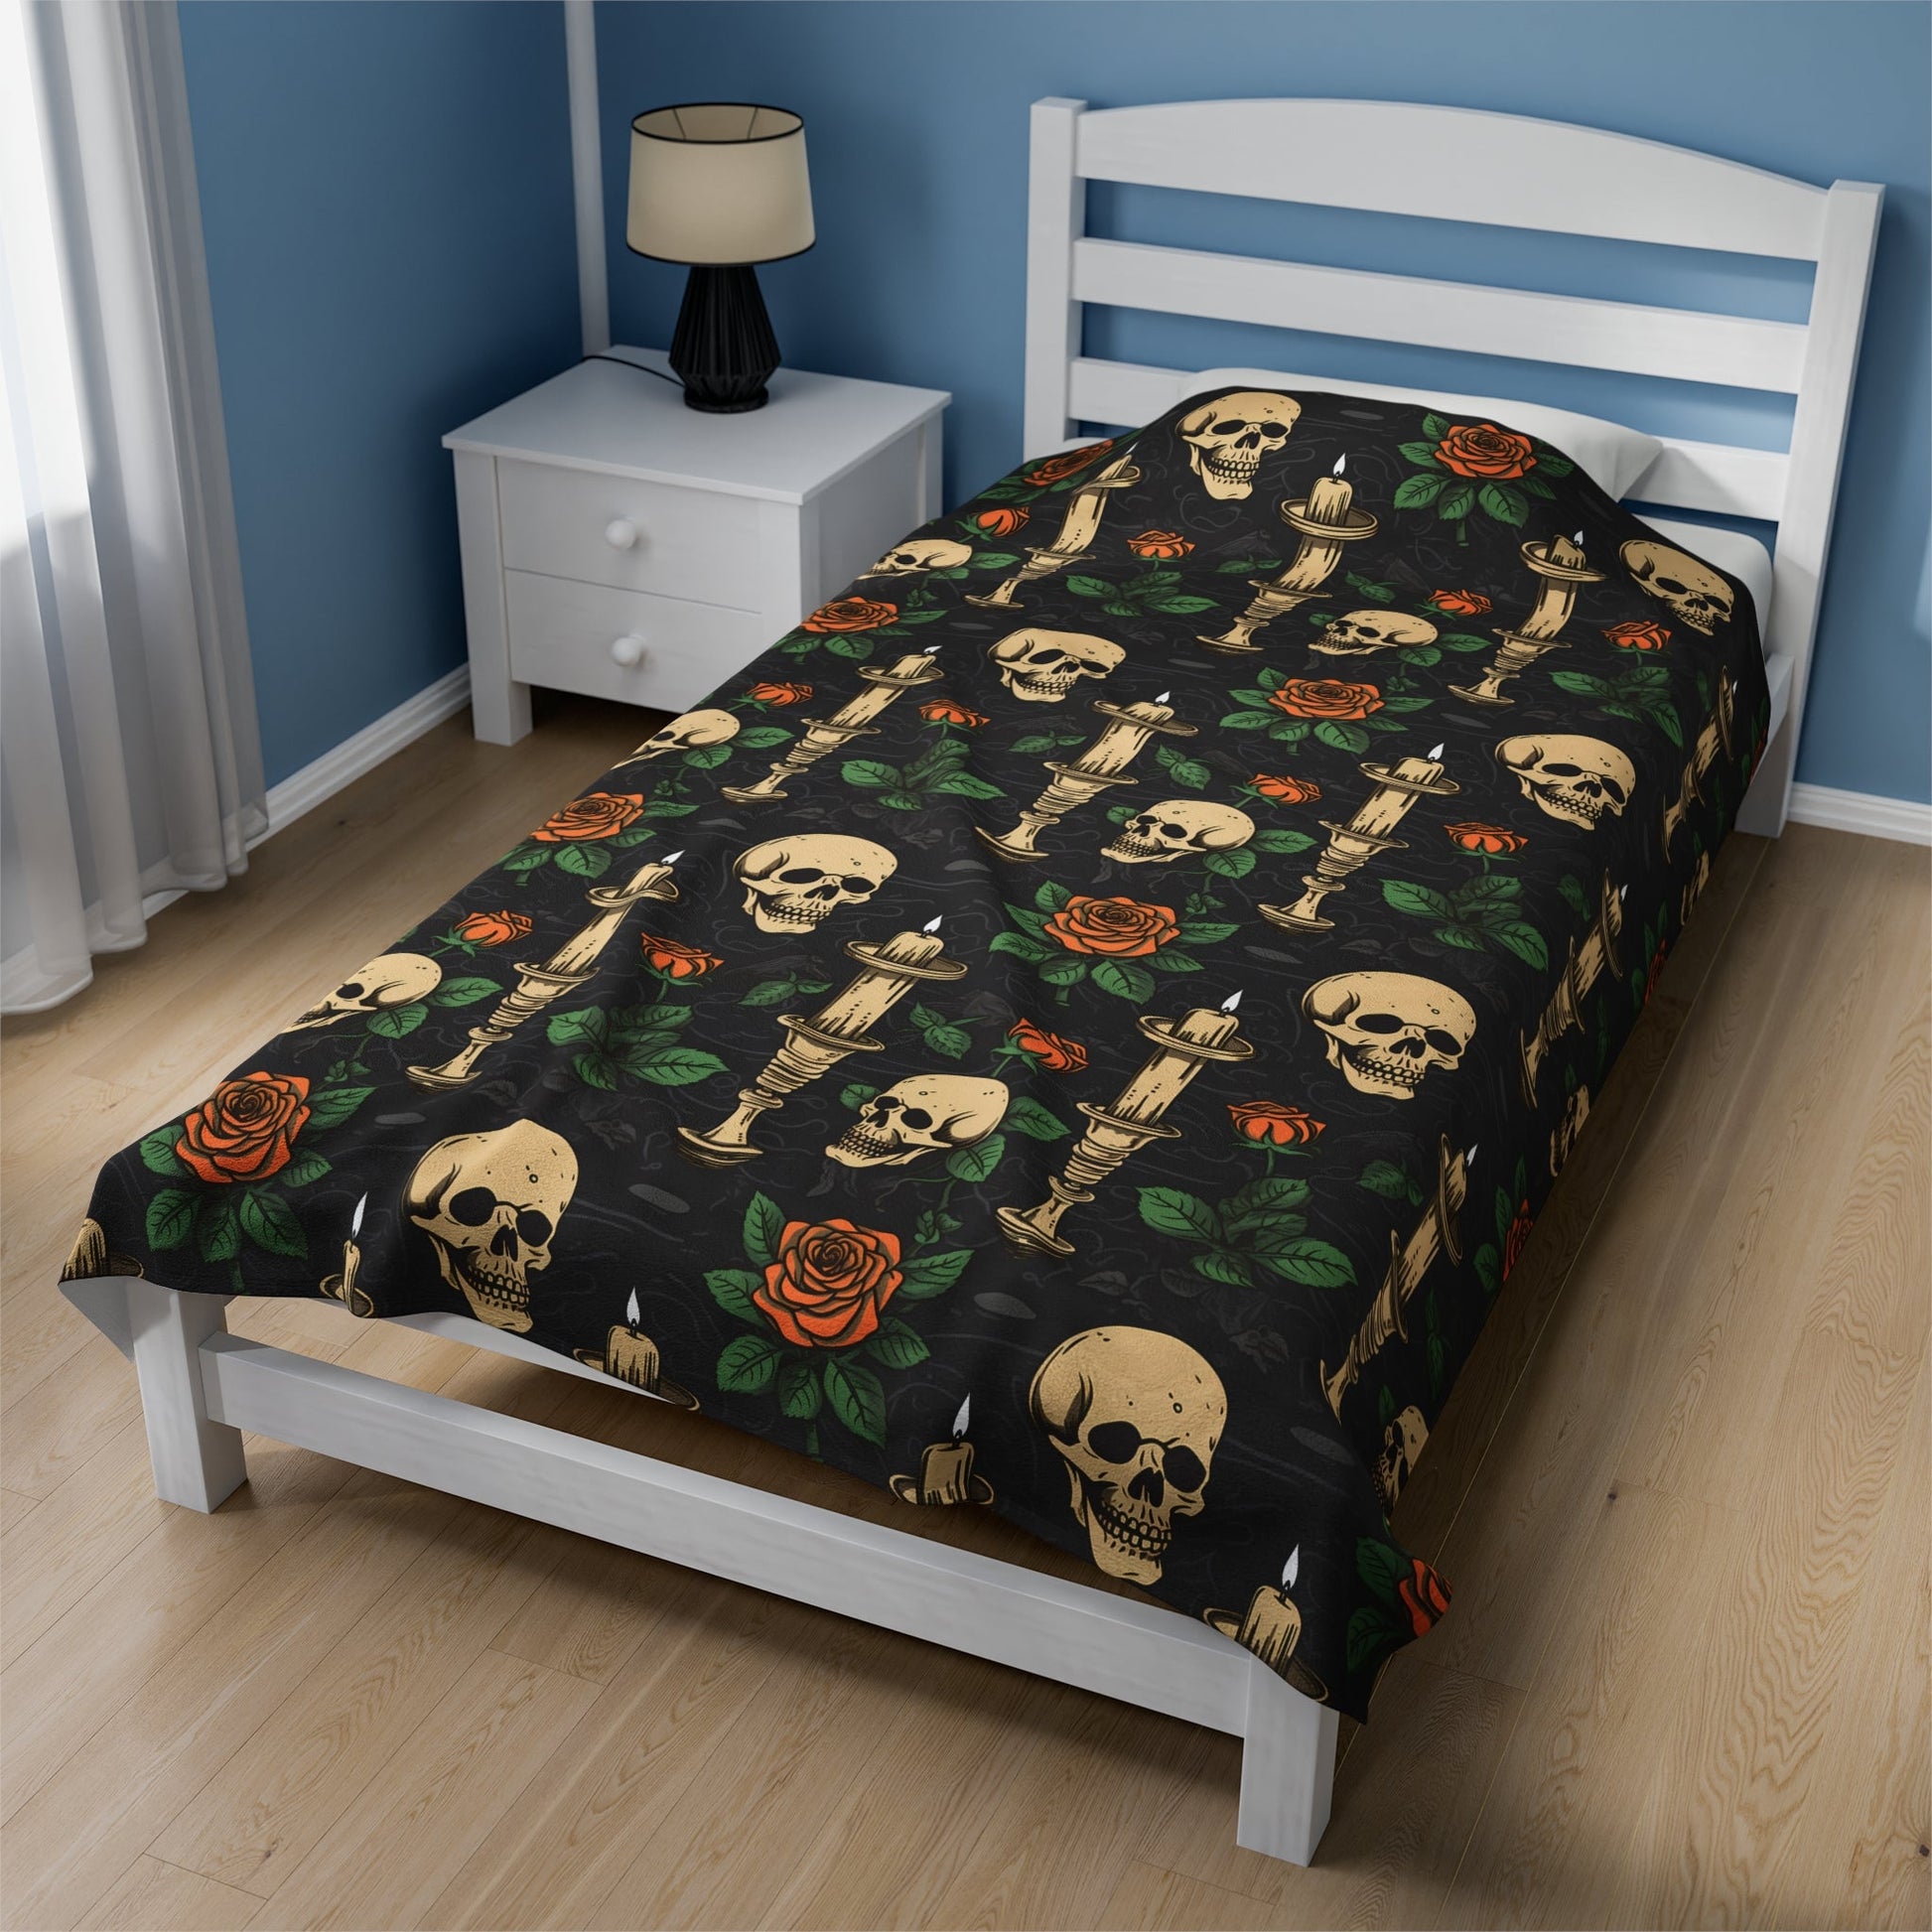 Skulls Roses and Candles Print Throw BlanketAll Over PrintsVTZdesigns30" × 40"All Over PrintAOPBed